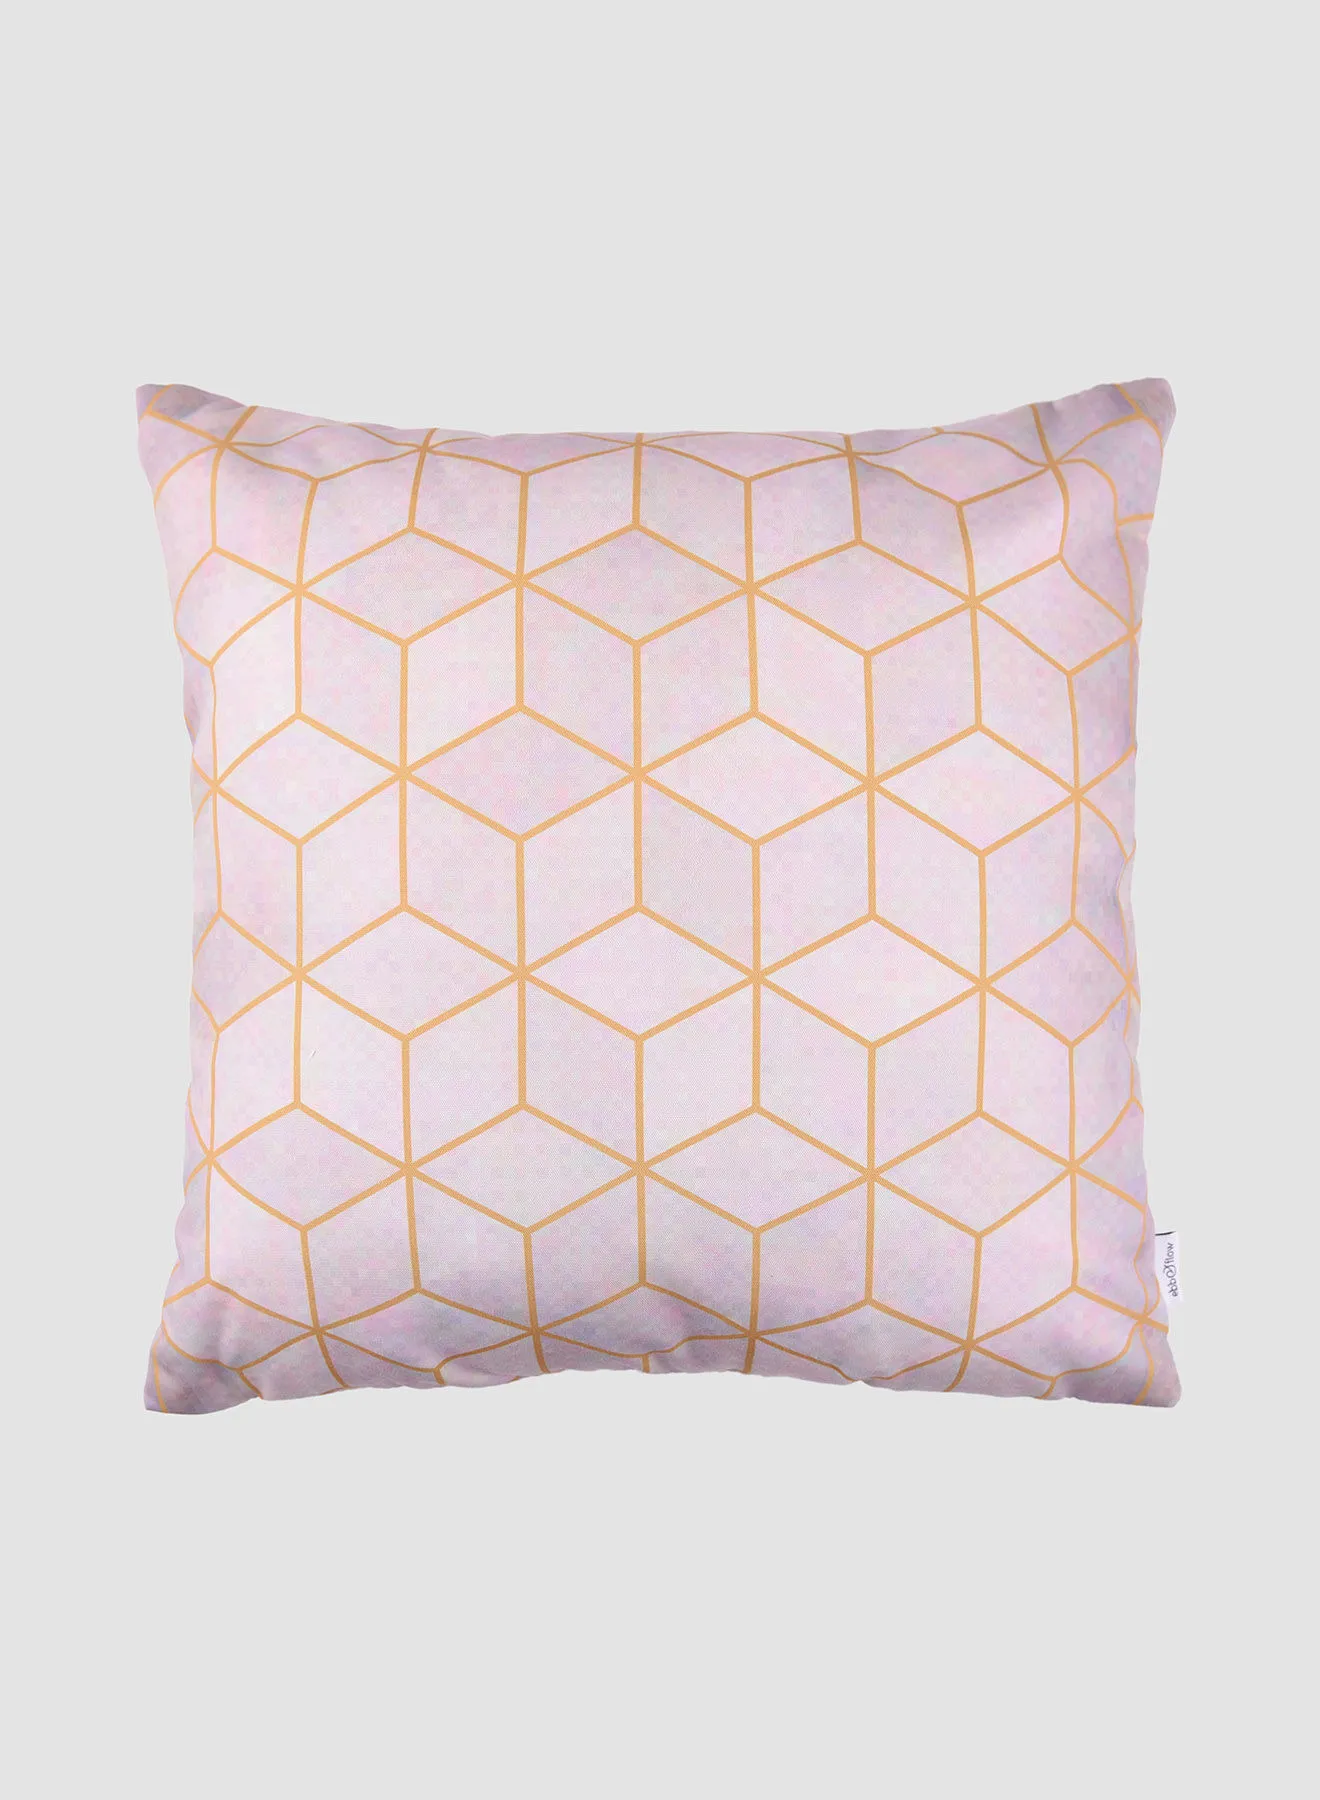 ebb & flow Printed Cushion, Unique Luxury Quality Decor Items for the Perfect Stylish Home Multicolour CUS267 45 x 45cm